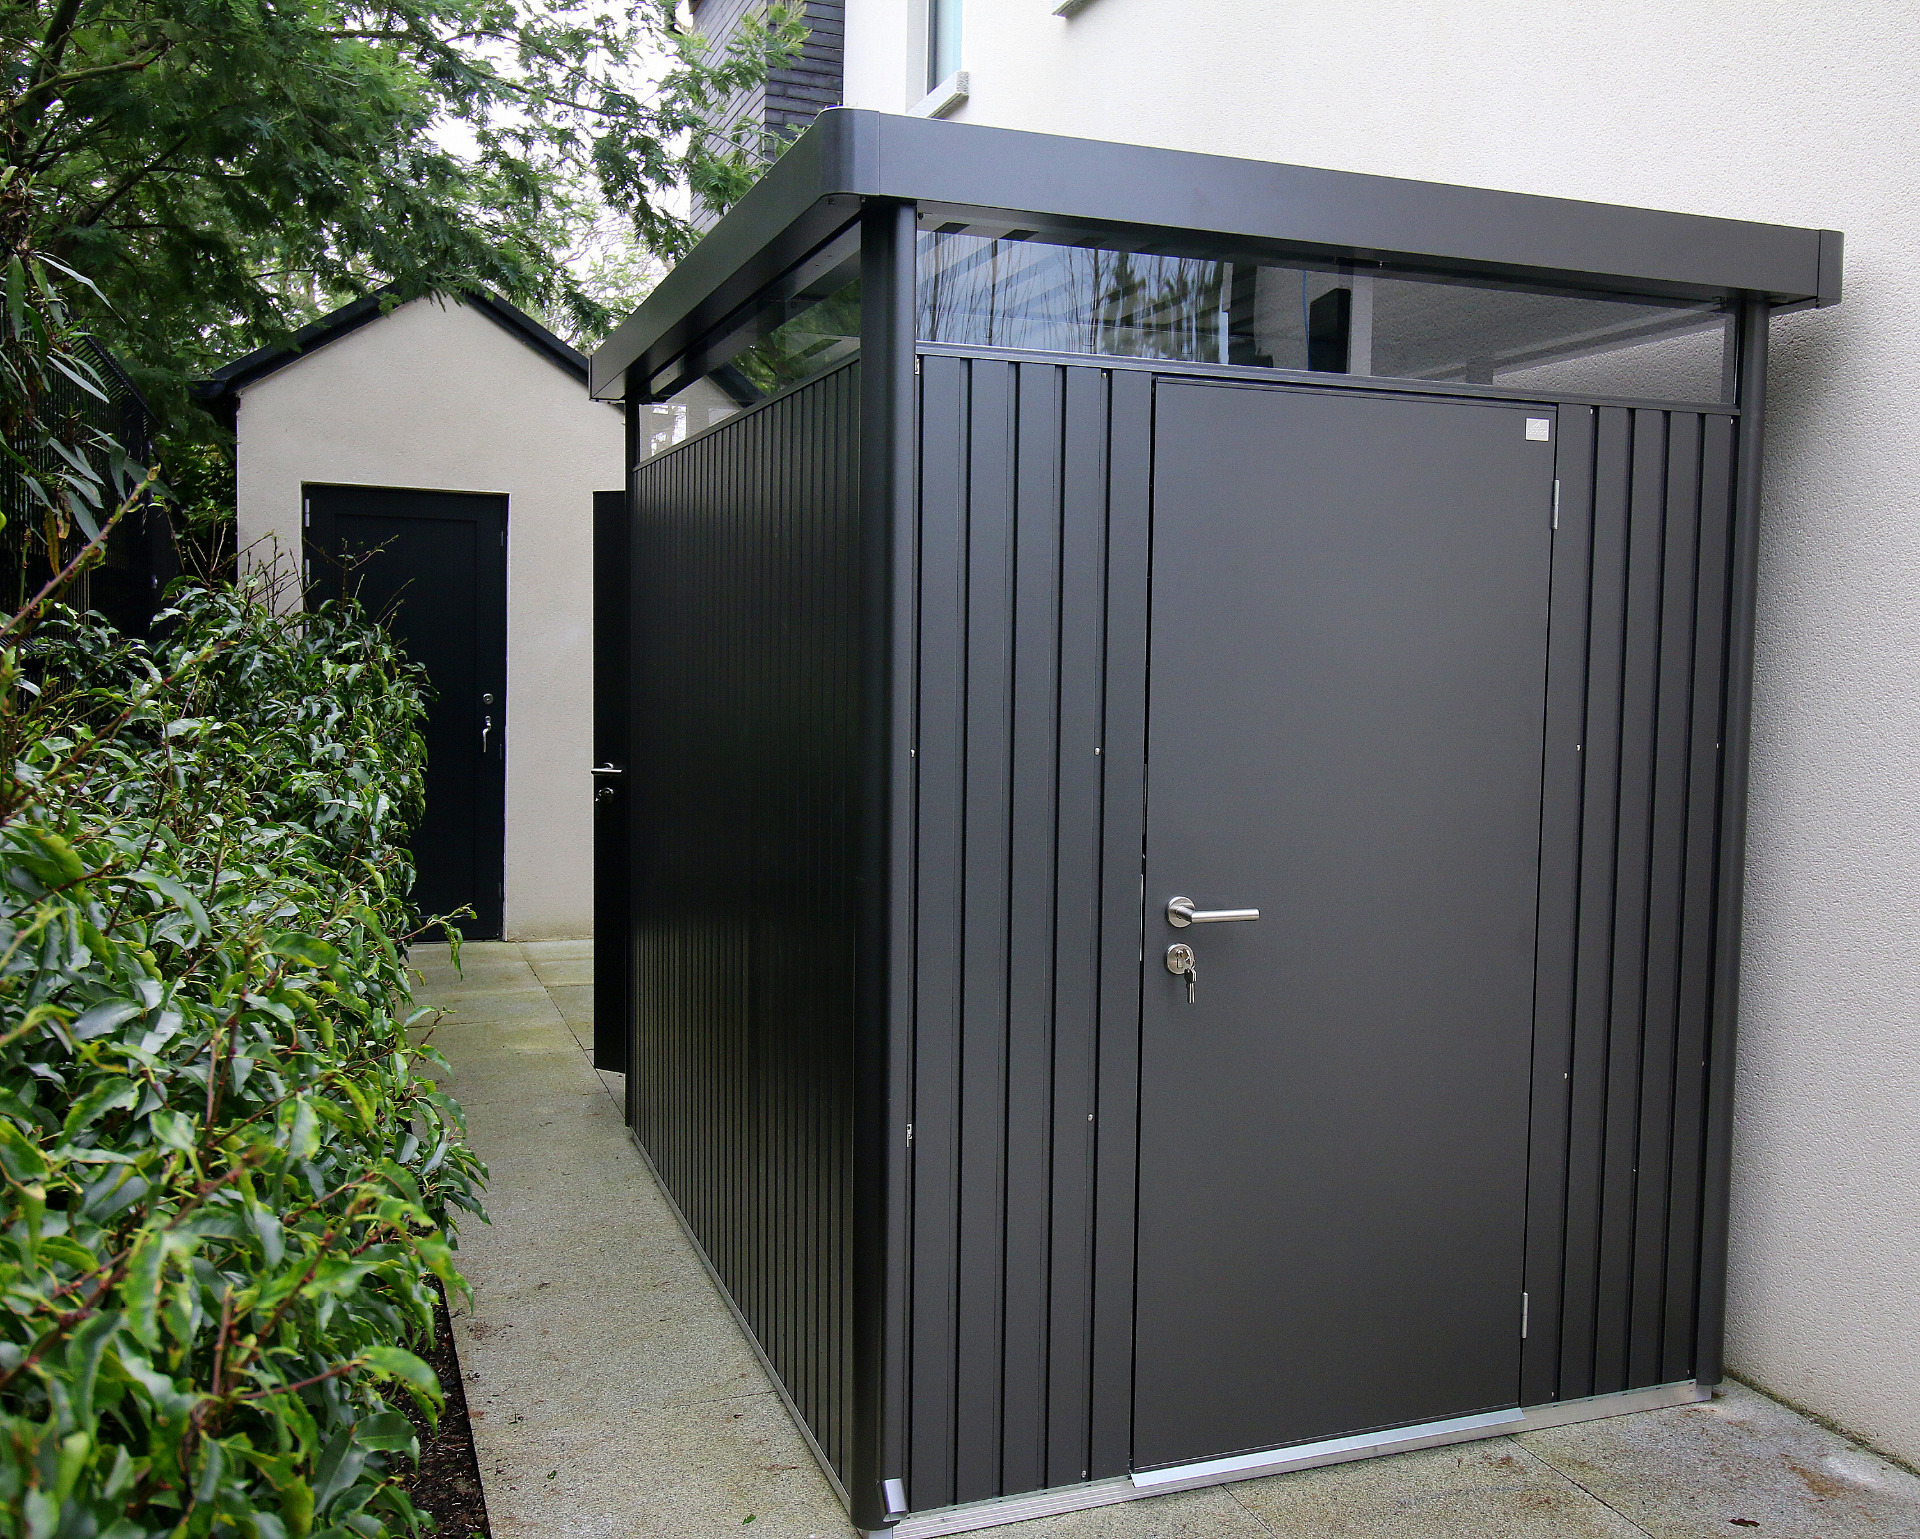 The ultimate in contemporary steel garden shed design & engineering | The Biohort HighLine Garden Shed | Owen Chubb Garden Landscapers